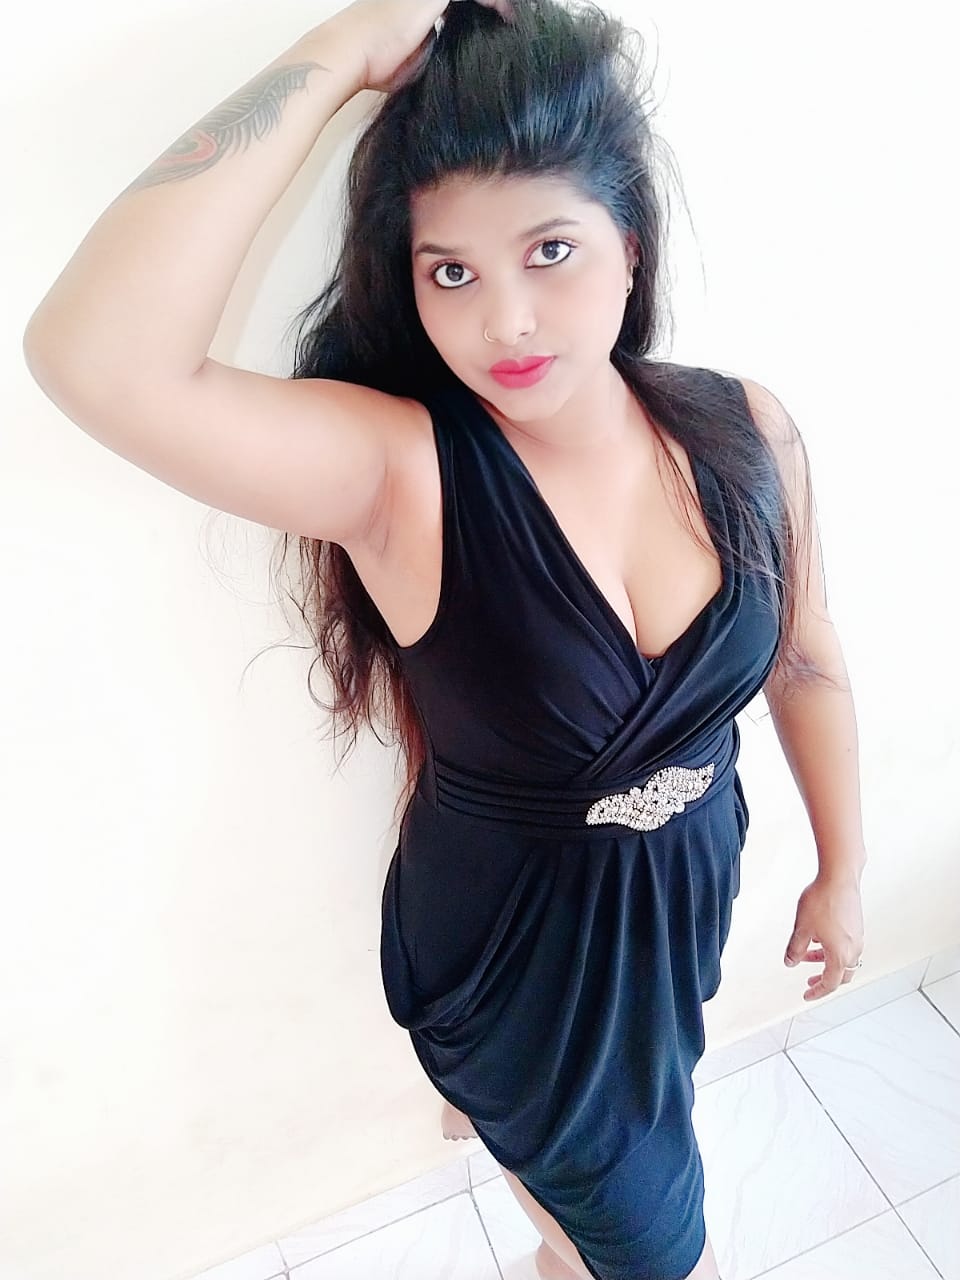 % GENUINE Benreu CALL GIRL SERVICE IN HOUR AVAILABLE SERVICE